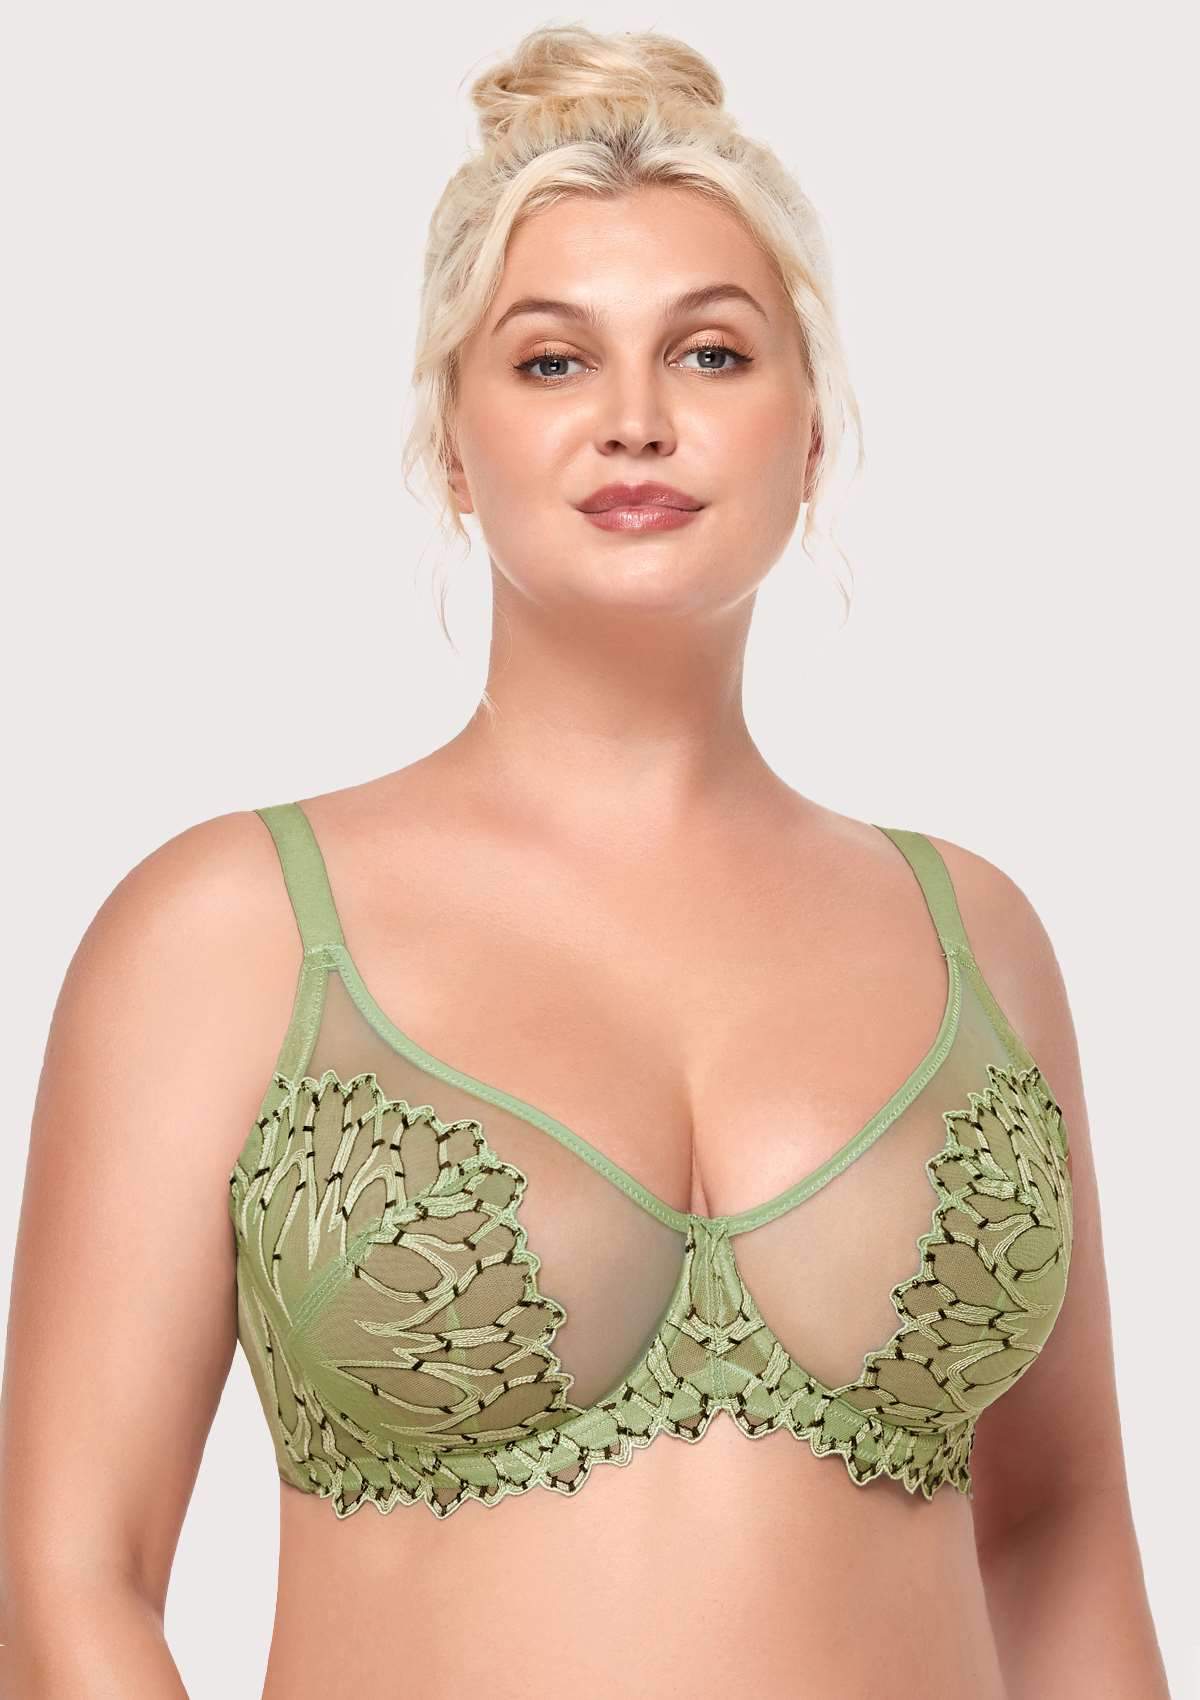 HSIA Lace Minimizer Bra for Full Figure Women | Underwire Unlined Plus Size  Bras with Adjustable Straps